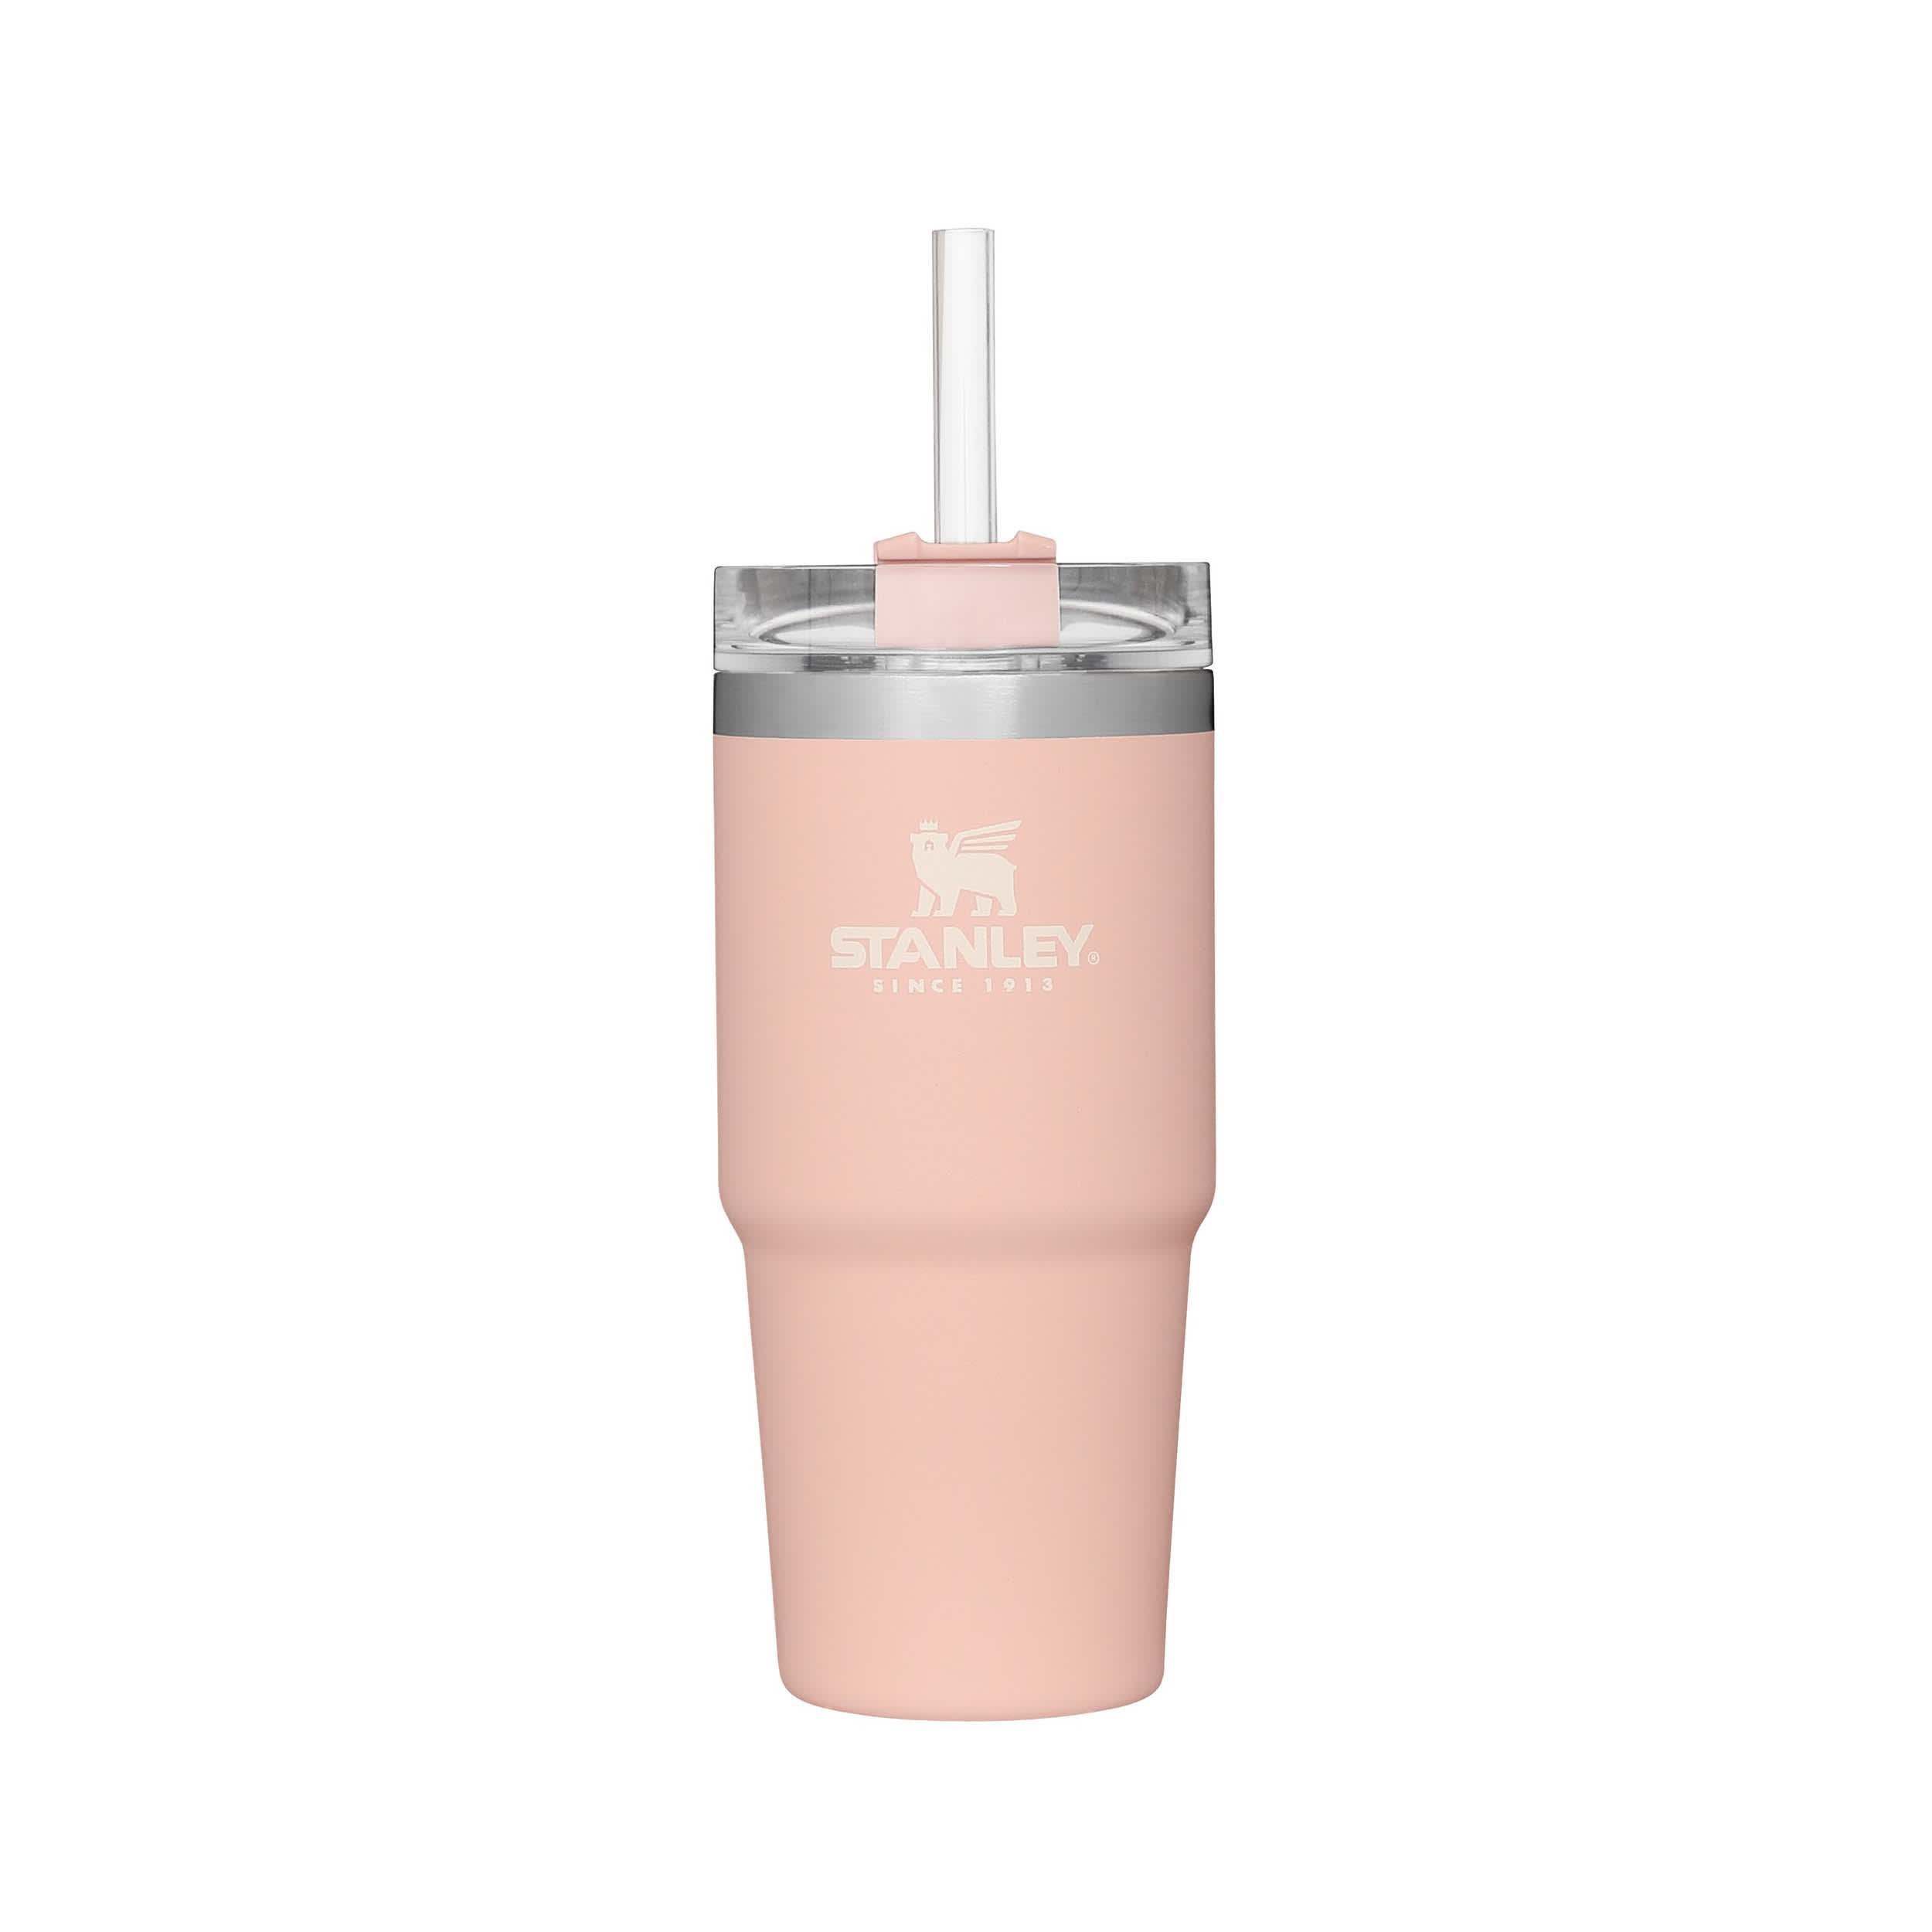 The Stanley Adventure Quencher Tumbler Is Finally Back in Stock